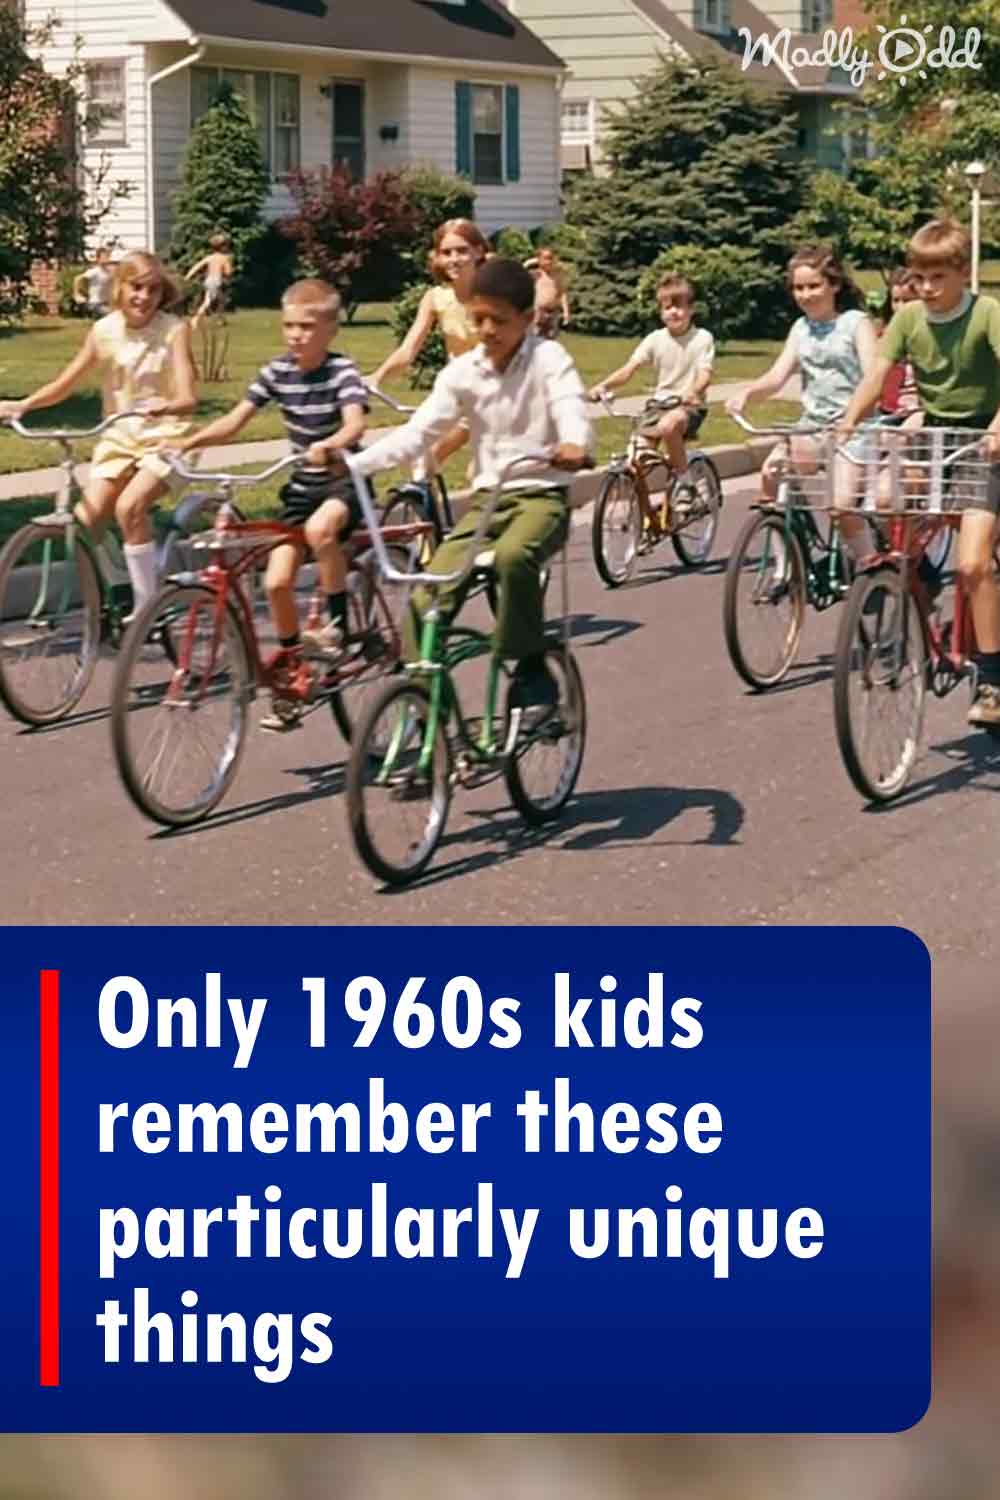 Only 1960s kids remember these particularly unique things